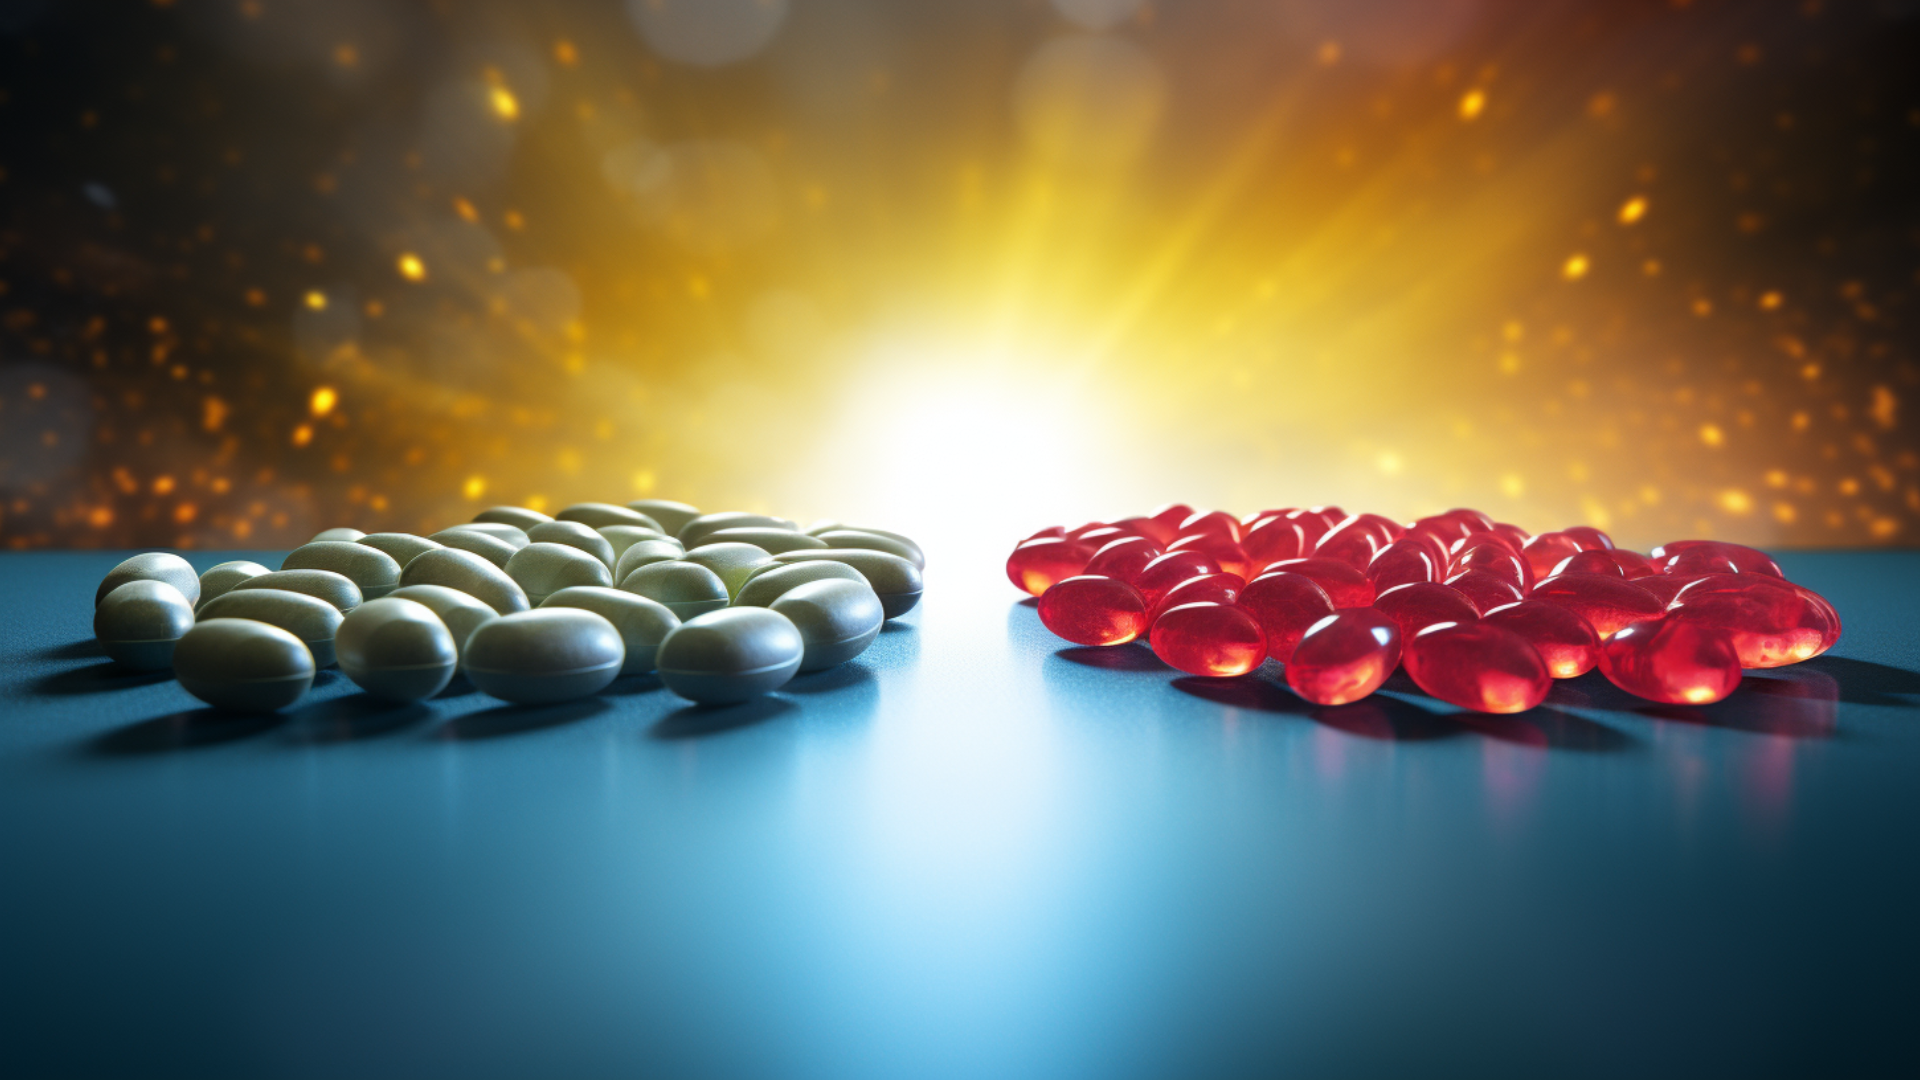 Cover Image for Crestor vs. Lipitor: Delving Deeper Into the Differences Between Two Top Statins